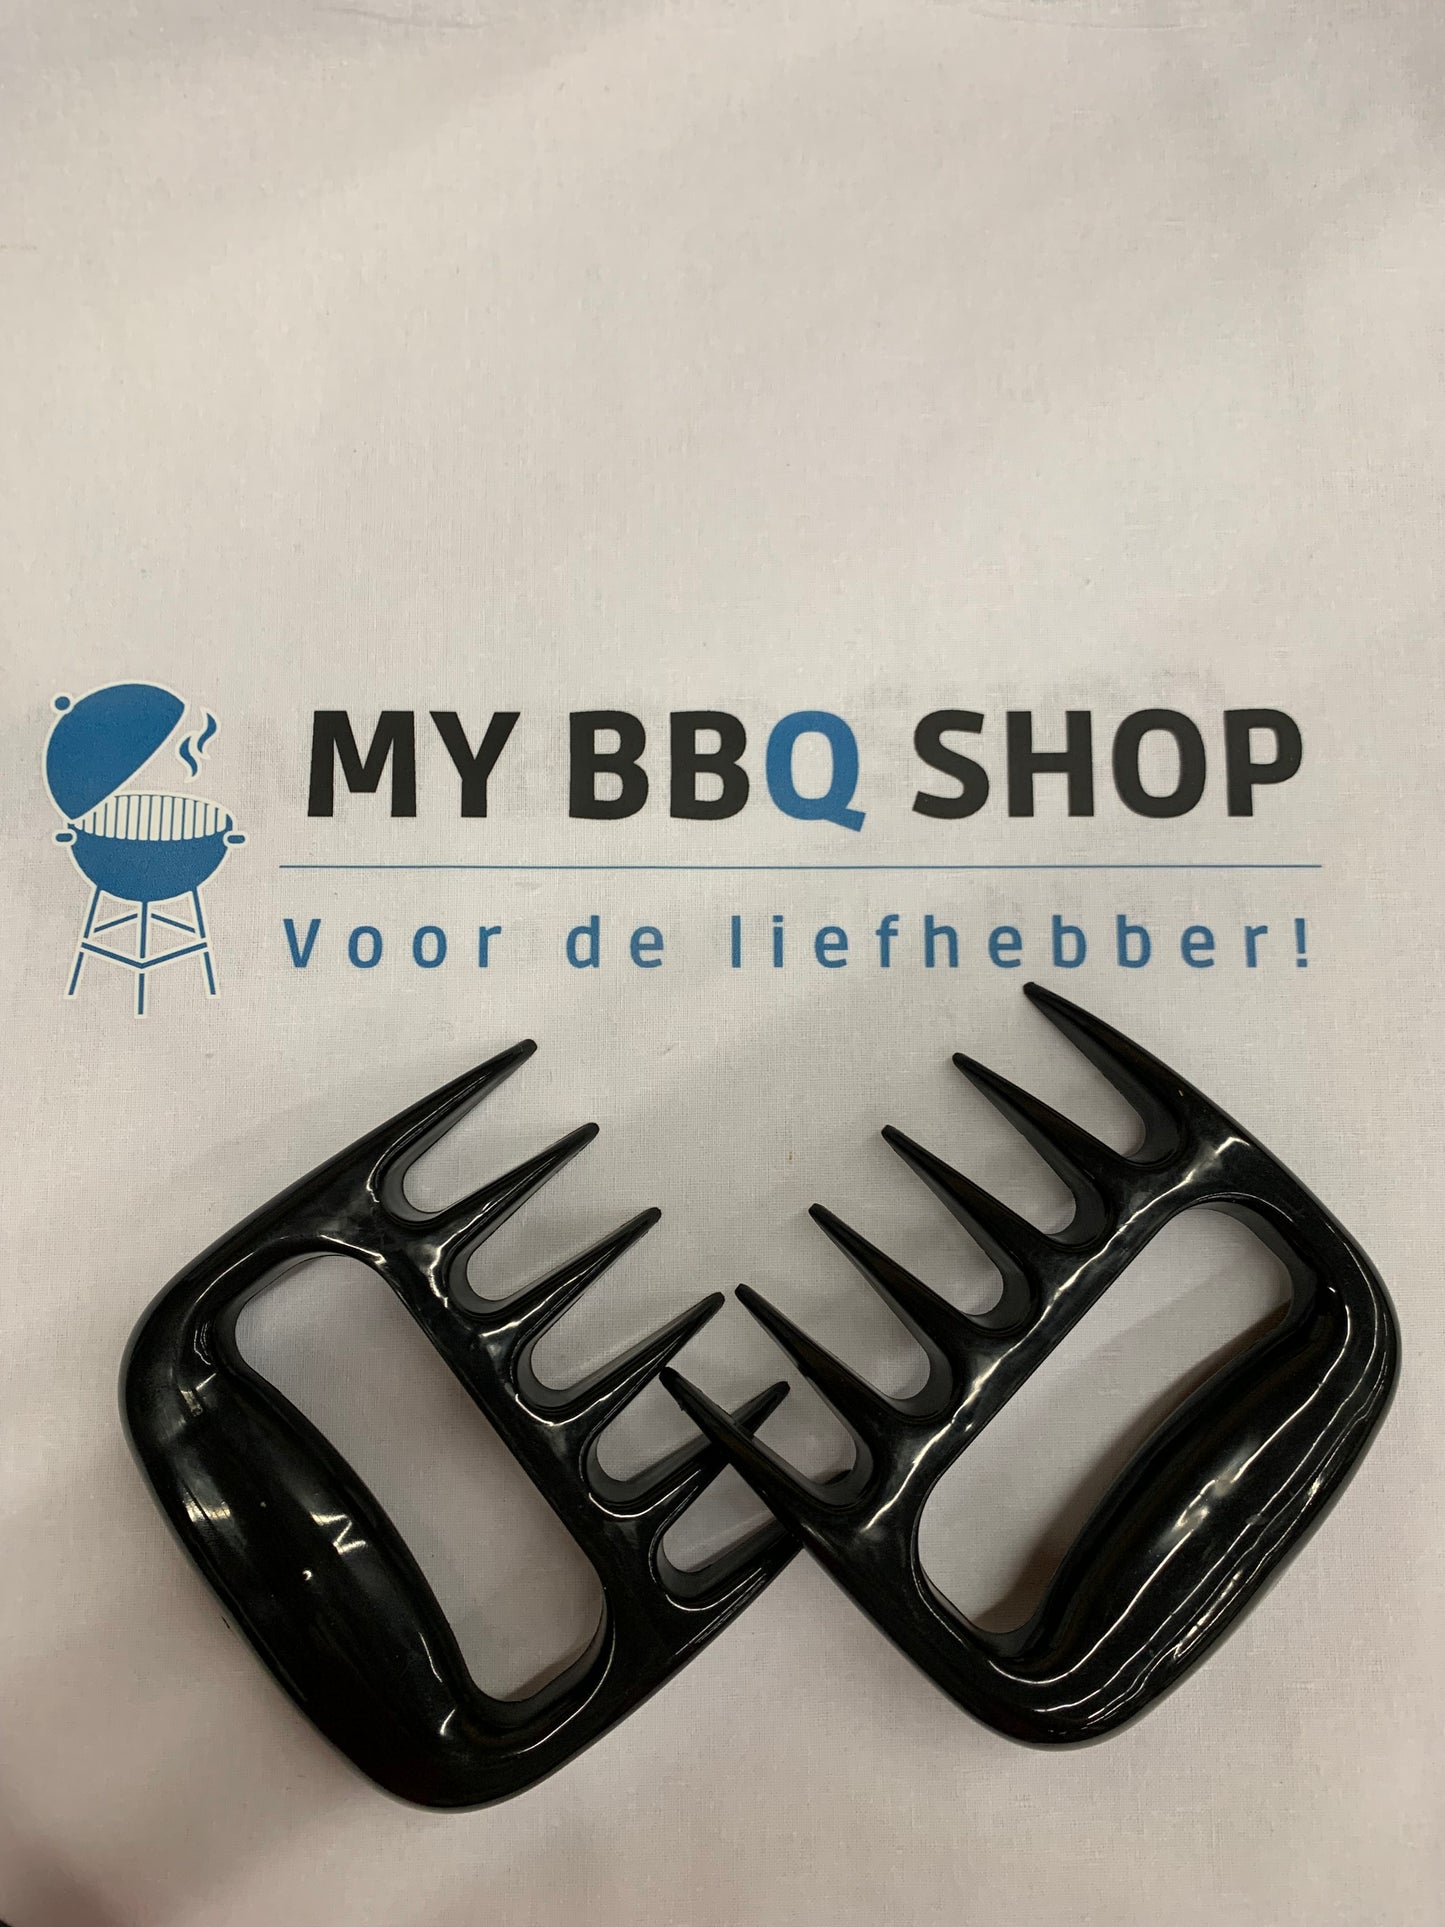 MY BBQ MEATCLAWS - BBQ Meat Bear Claw, voor o.a. Pulled Pork - Vleesklauwen & vleeshouder